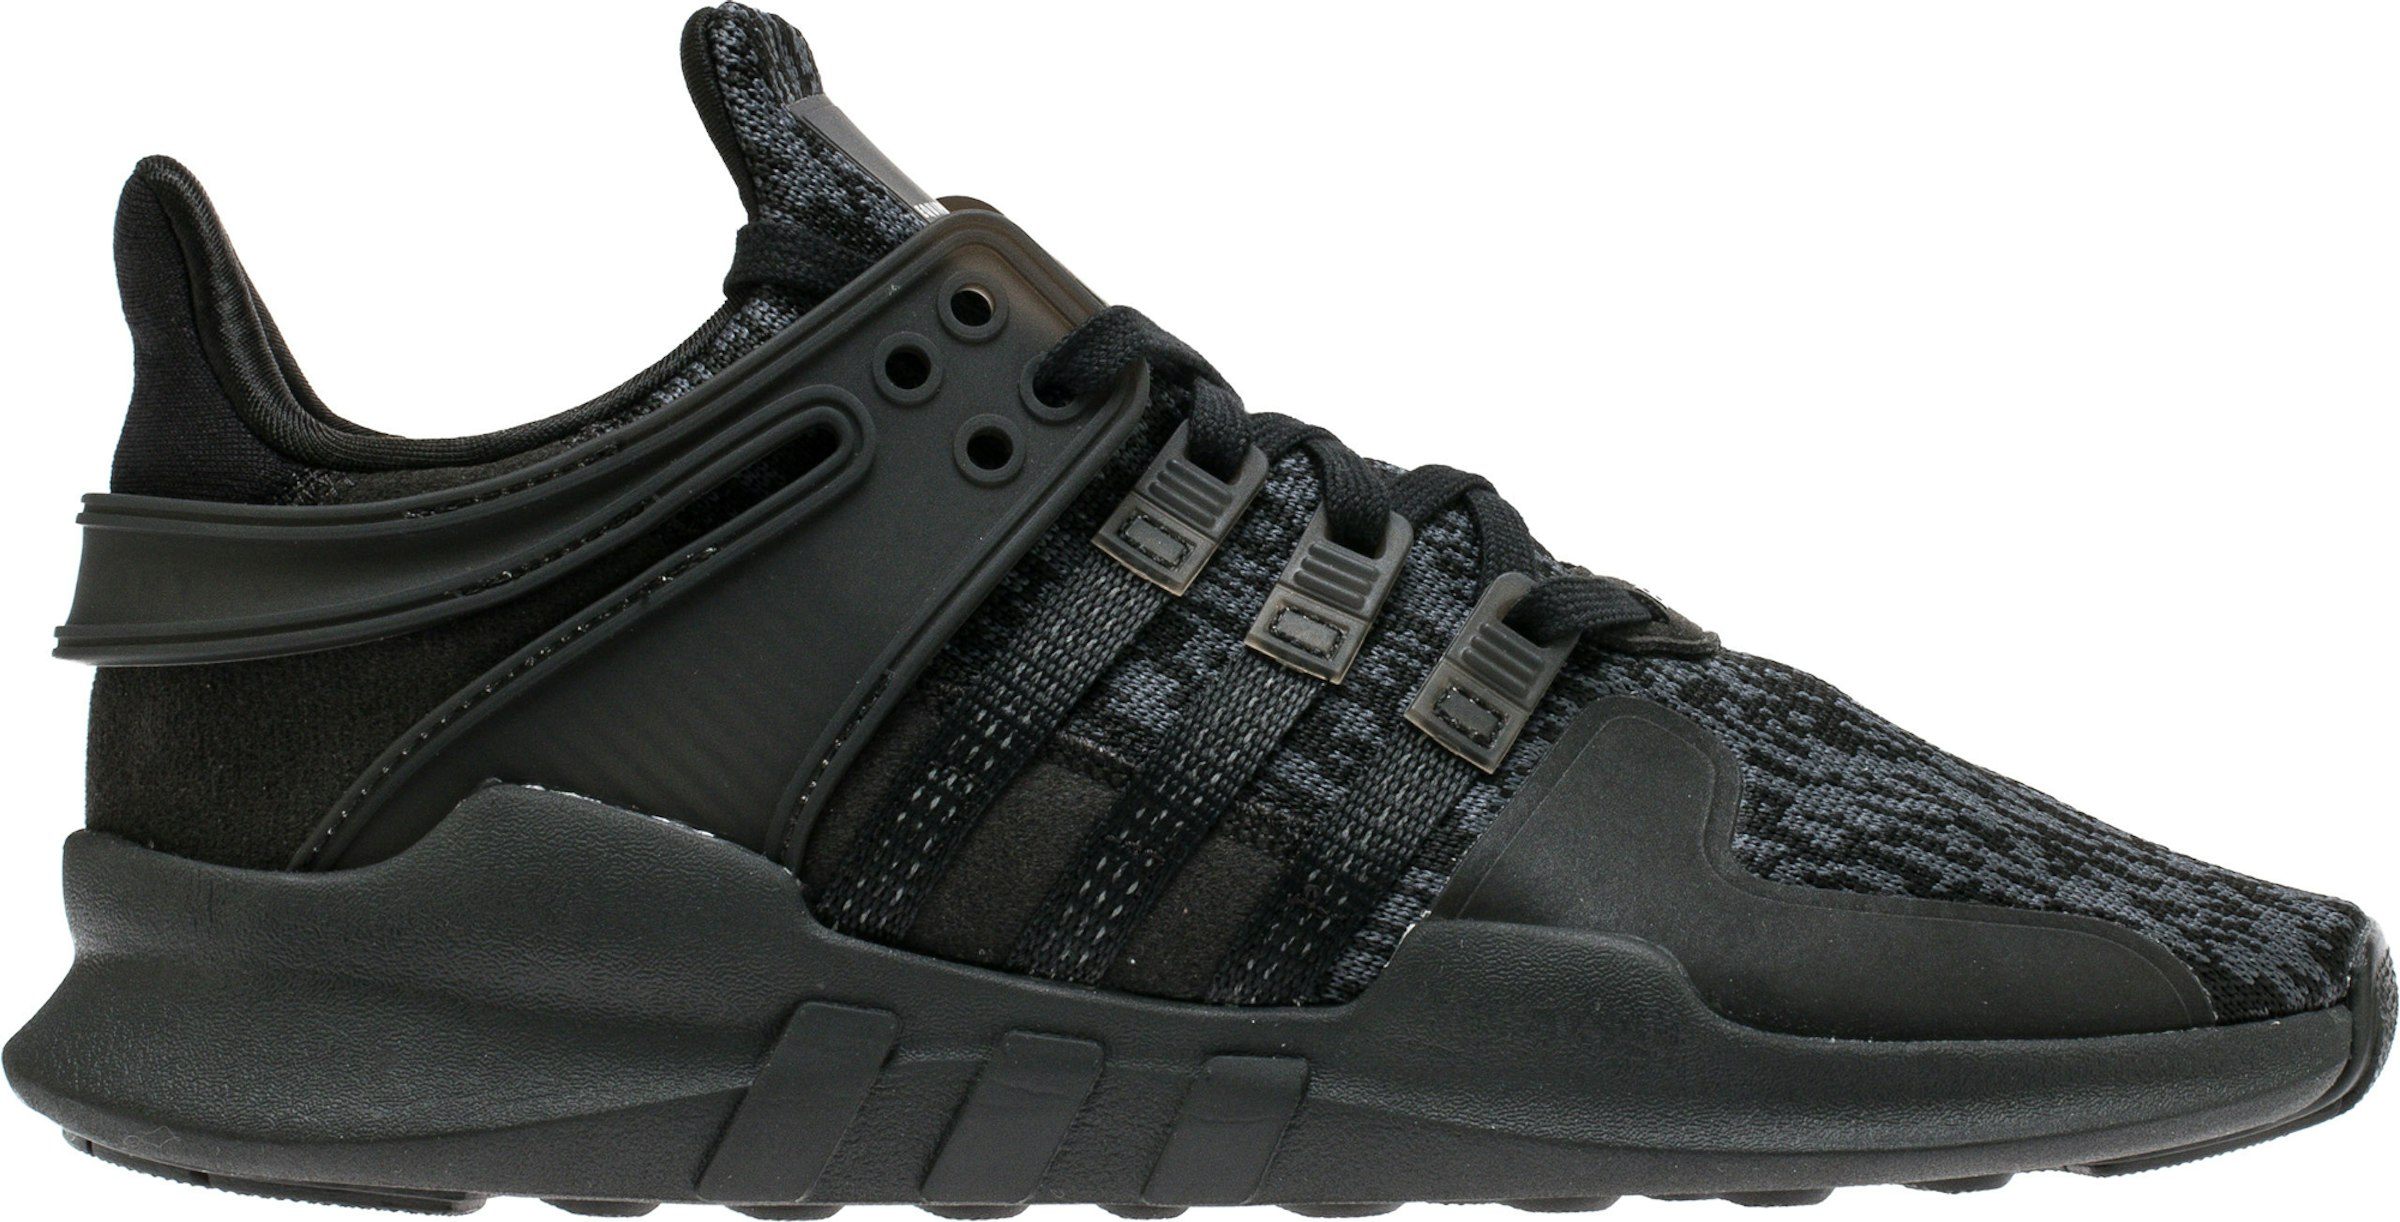 adidas EQT Support Triple Black (Youth) Kids' BY9873 - US